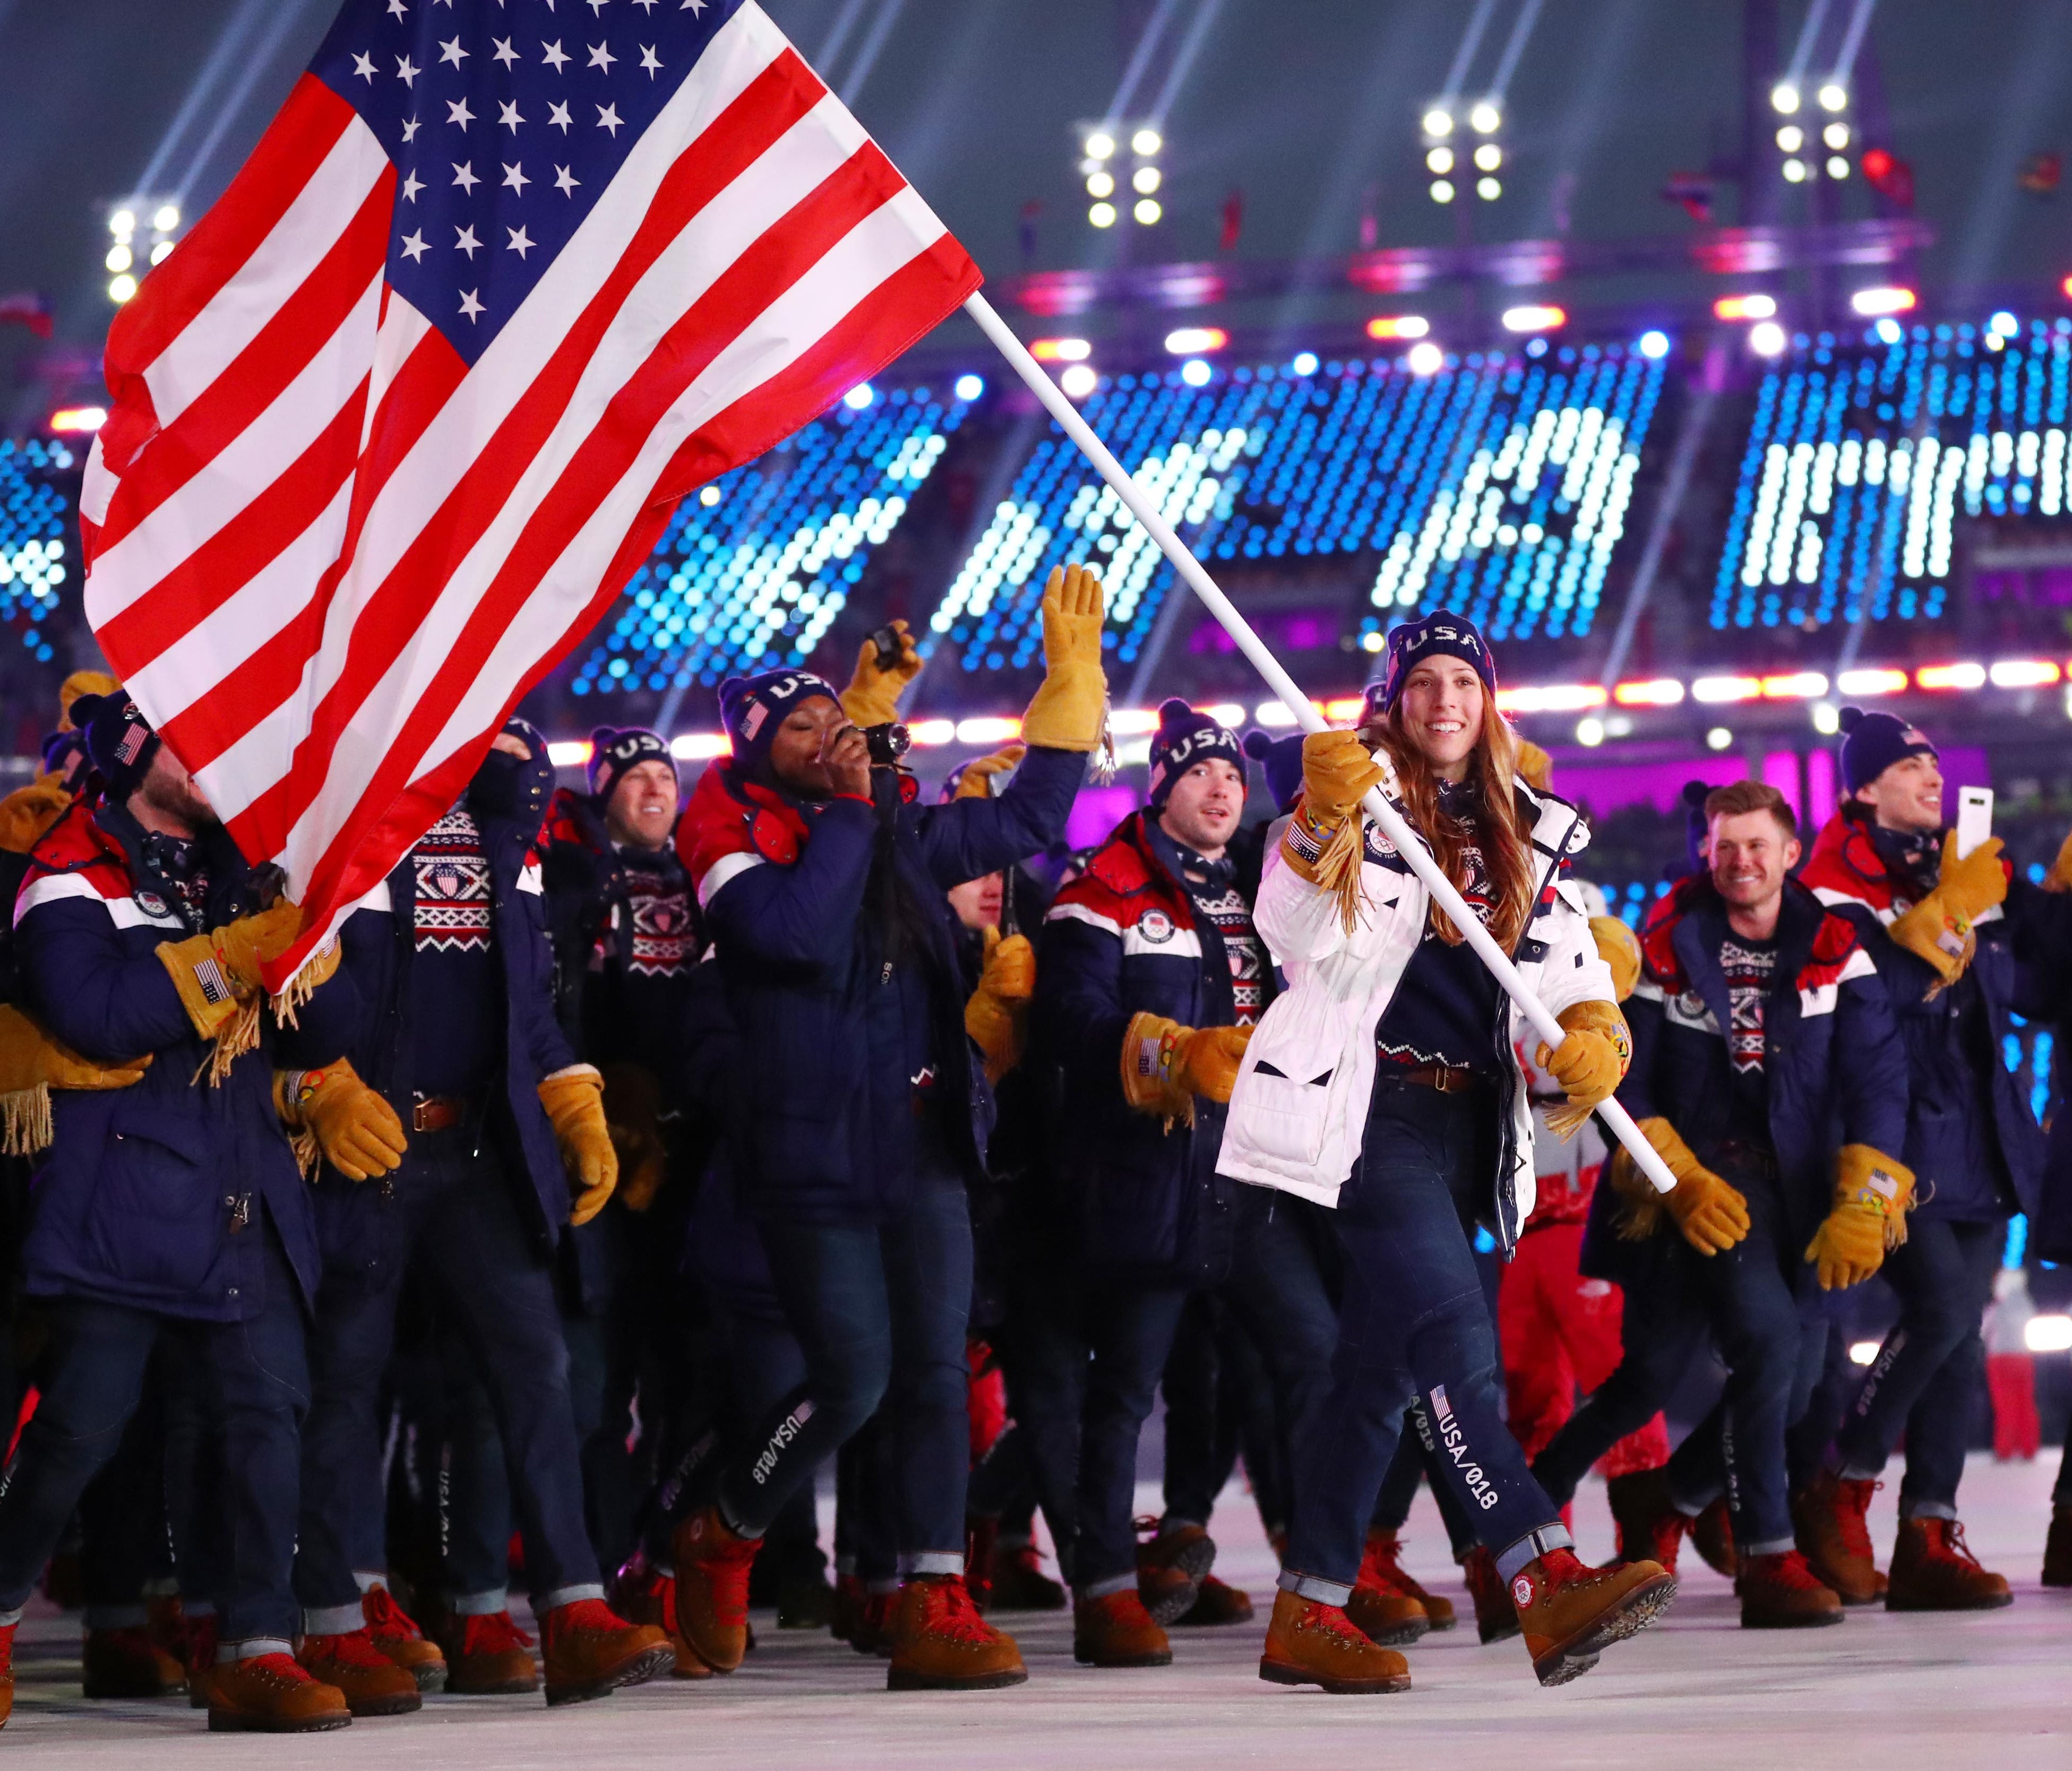 Erin Hamlin leads the delegation from the United States during the opening ceremony for the Pyeongchang 2018 Olympic Winter Games, Feb. 9, 2018.